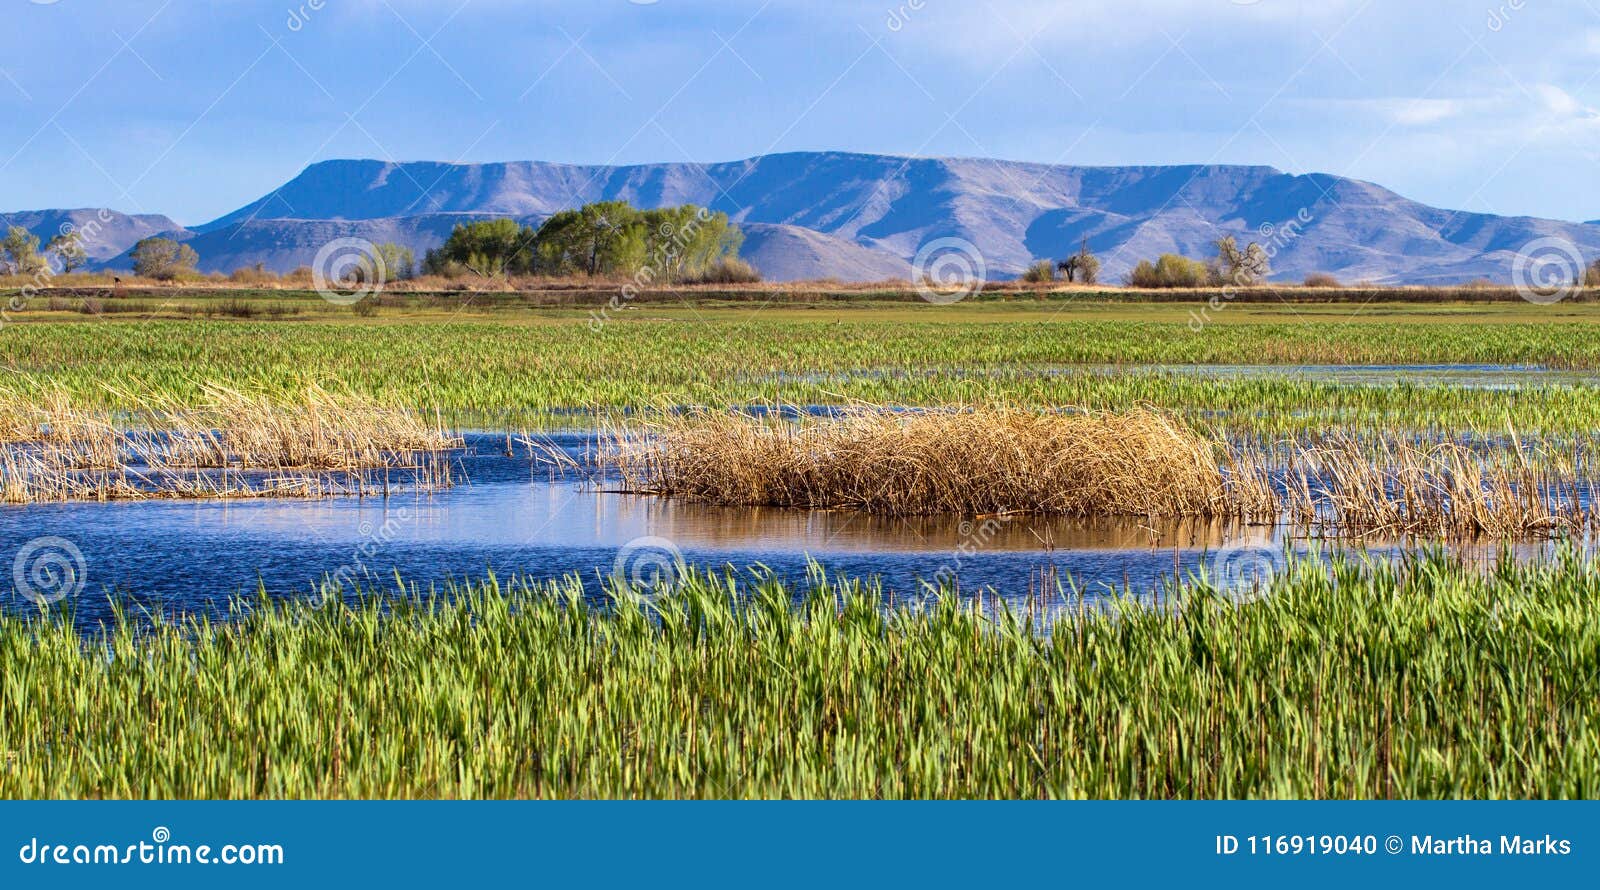 the beautiful marsh at alamosa national wildlife refuge at the edge of the rocky mountains in southern colorado